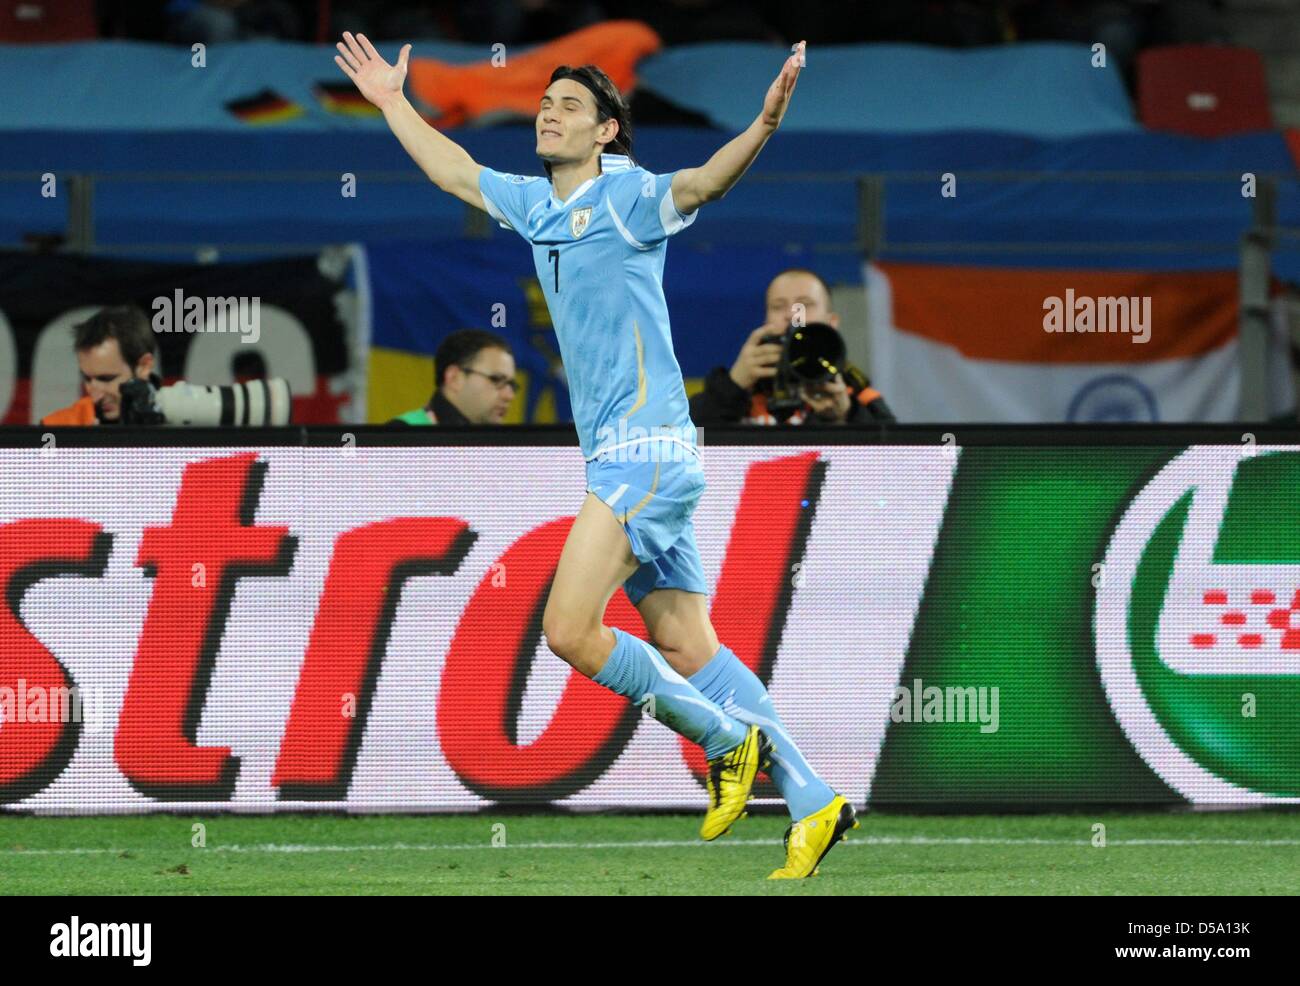 Uruguay's Edinson Cavani celebrates after equalising 1-1 during the 2010 FIFA World Cup third place match between Uruguay and Germany at the Nelson Mandela Bay Stadium in Port Elizabeth, South Africa 10 July 2010. Photo: Marcus Brandt dpa - Please refer to http://dpaq.de/FIFA-WM2010-TC  +++(c) dpa - Bildfunk+++ Stock Photo